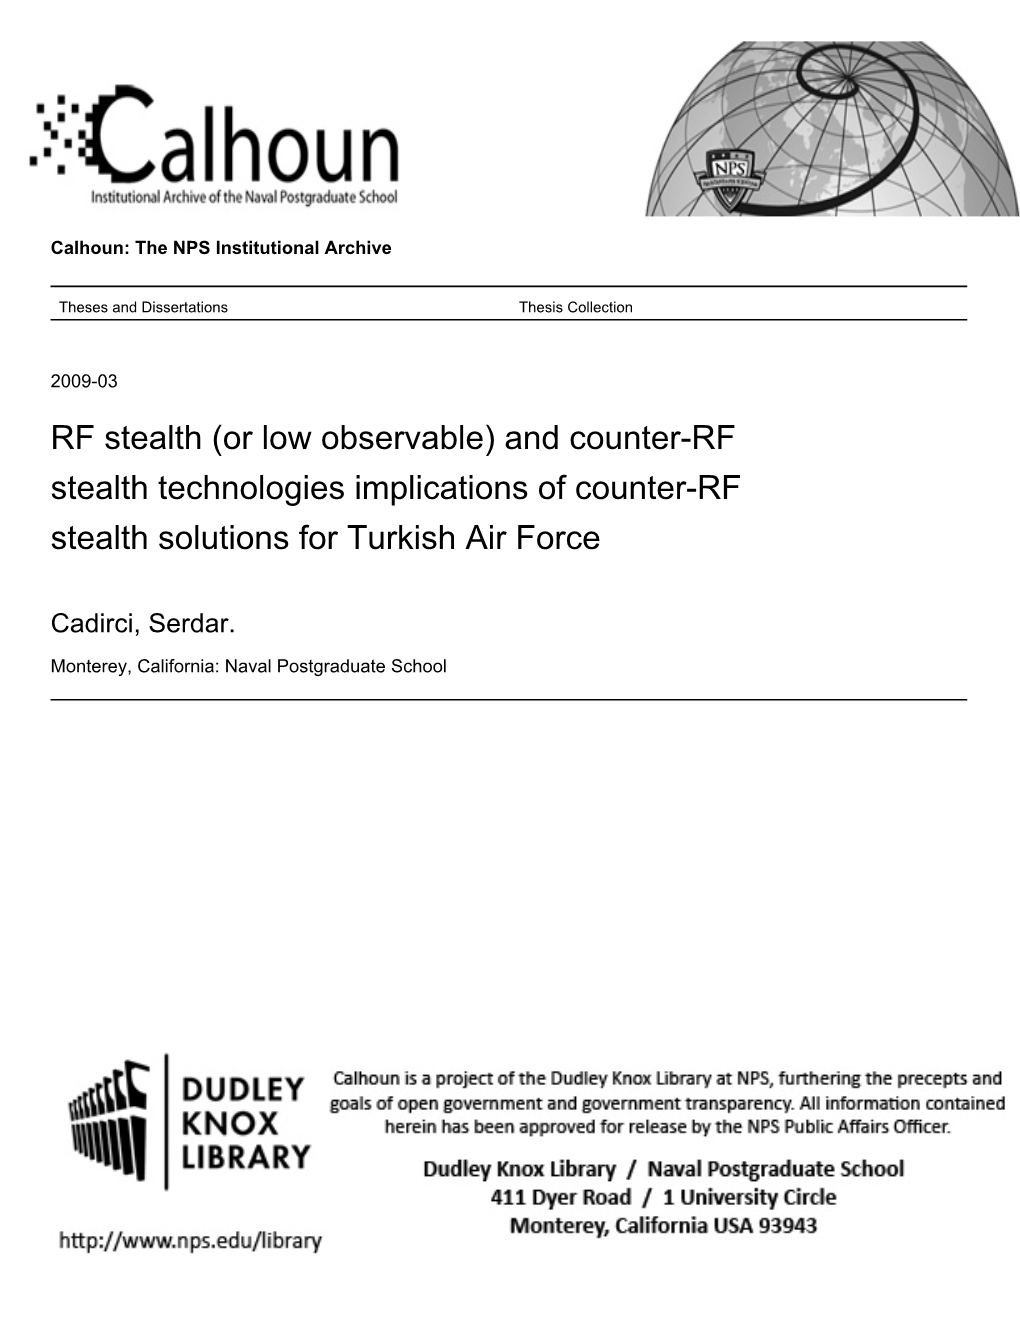 (Or Low Observable) and Counter-RF Stealth Technologies Implications of Counter-RF Stealth Solutions for Turkish Air Force